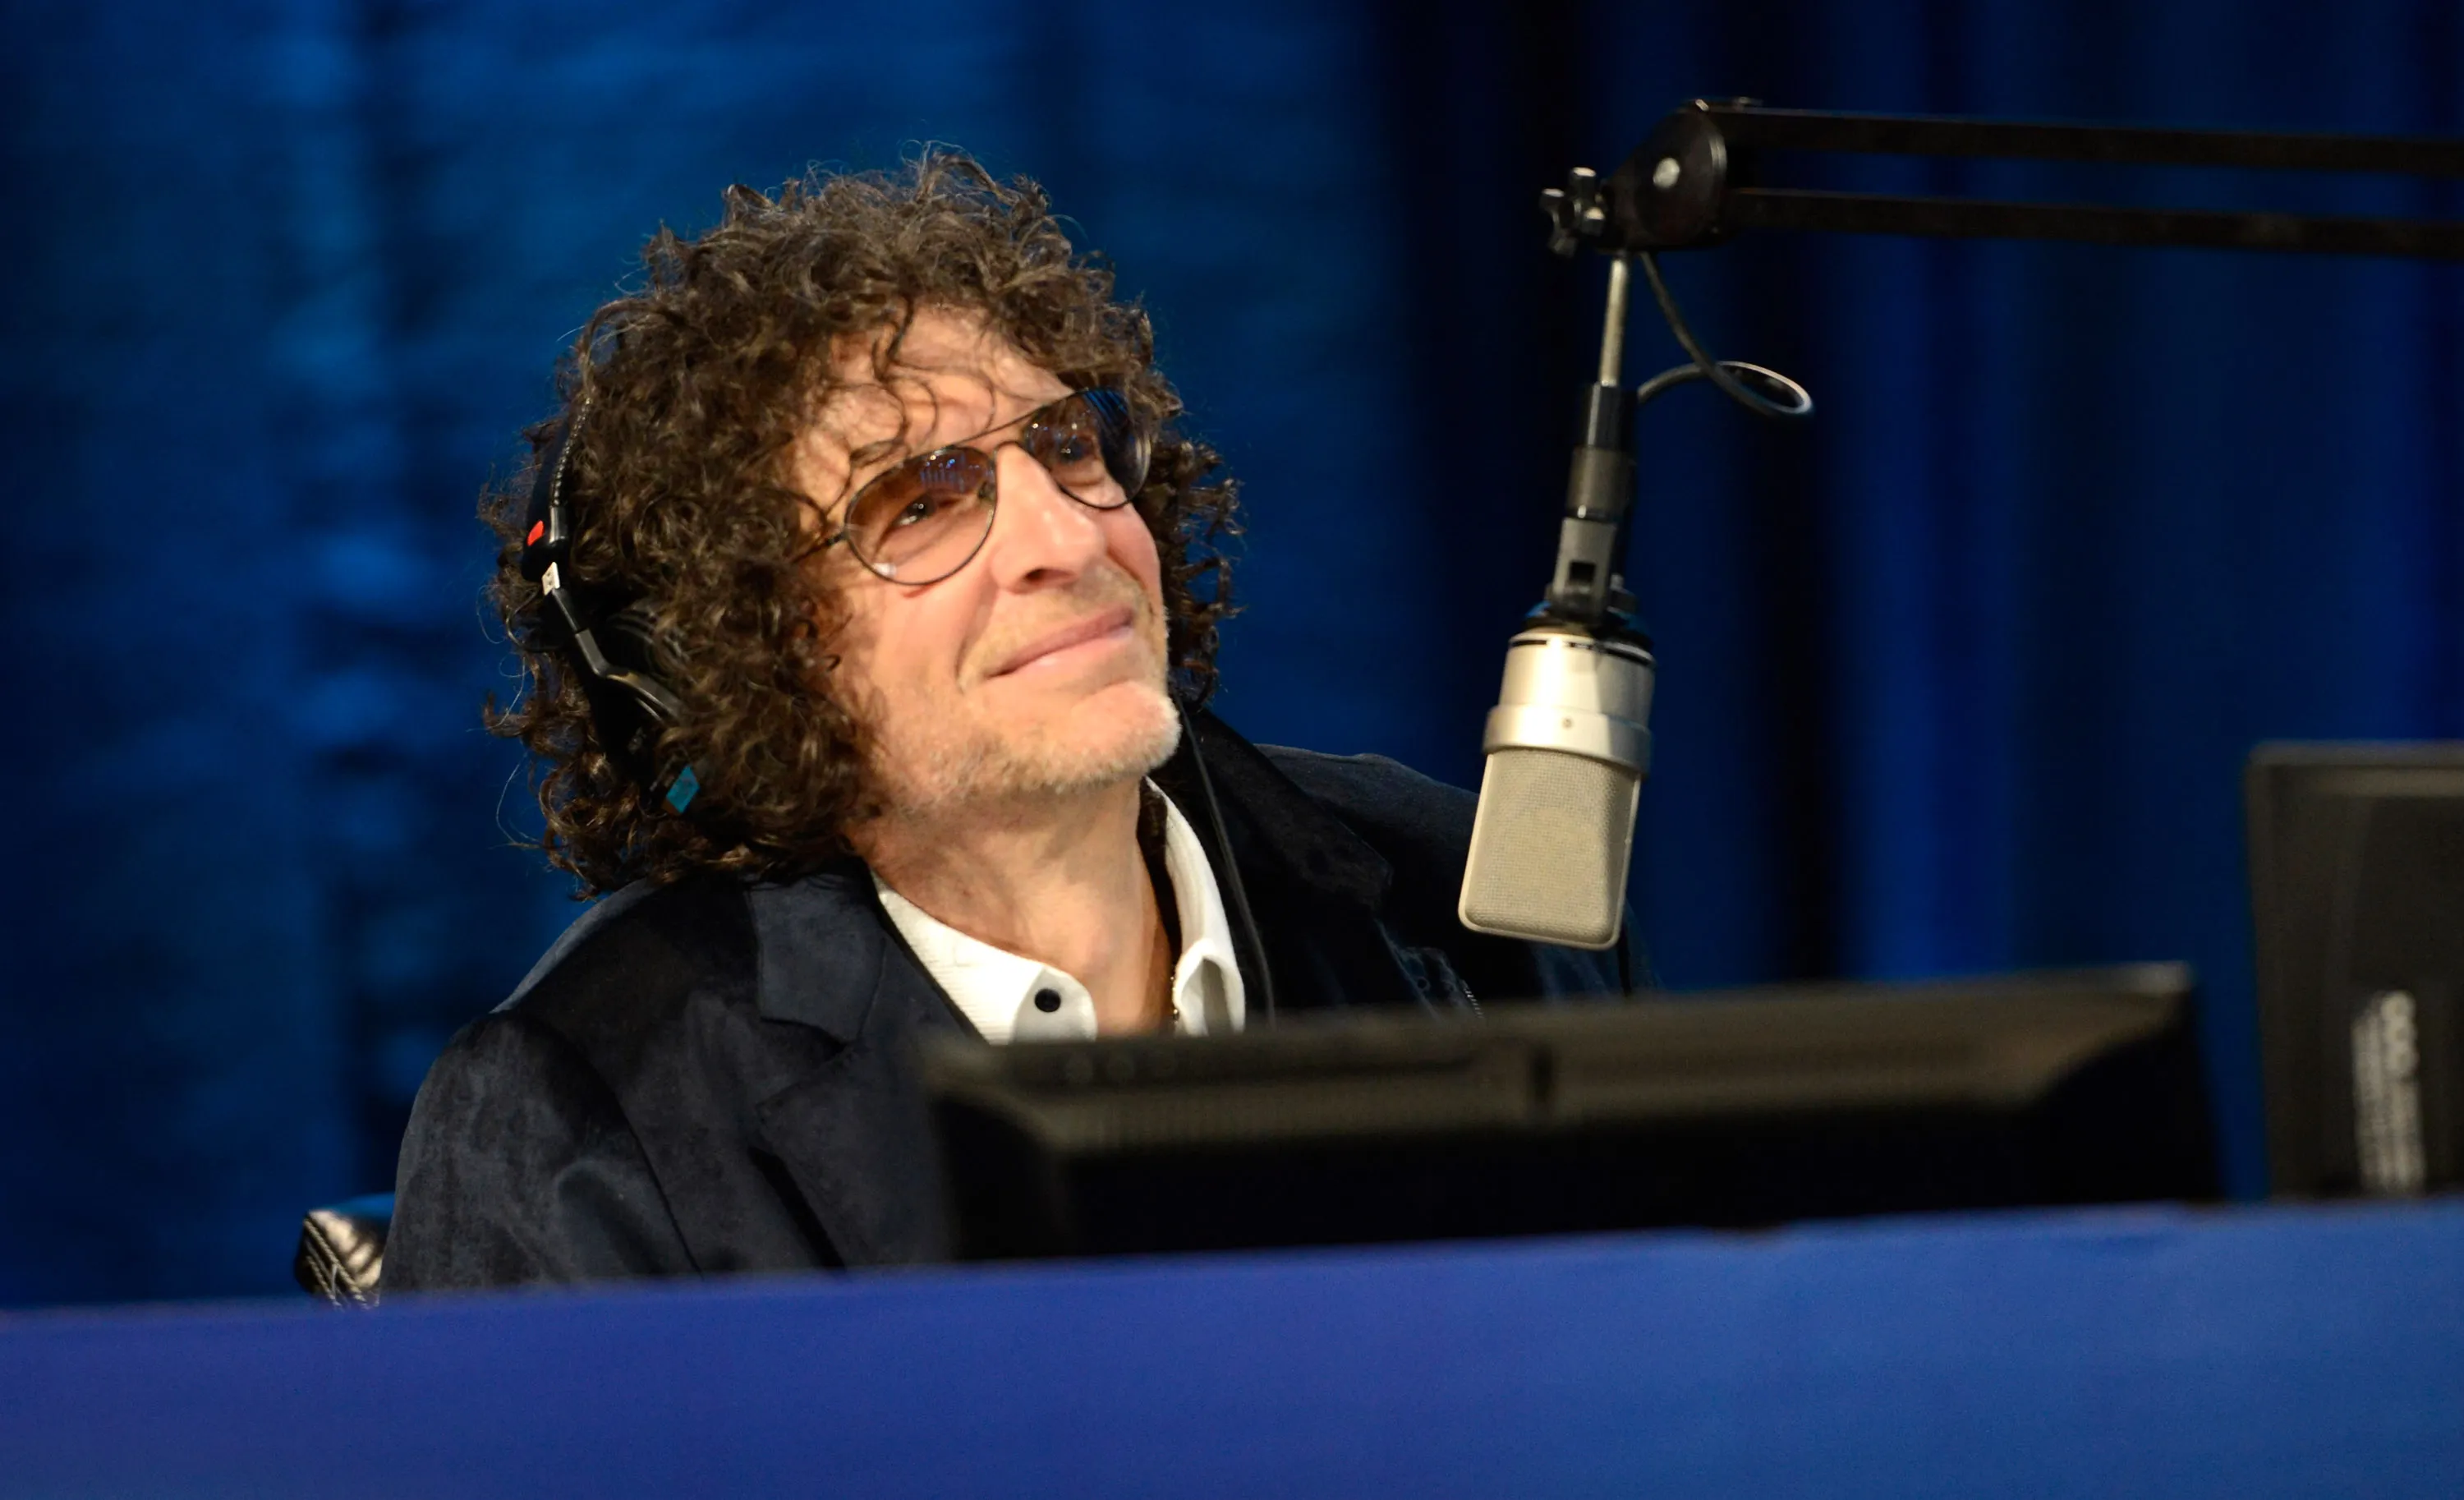 Howard Stern re-proposes to wife on 'Jimmy Kimmel Live!